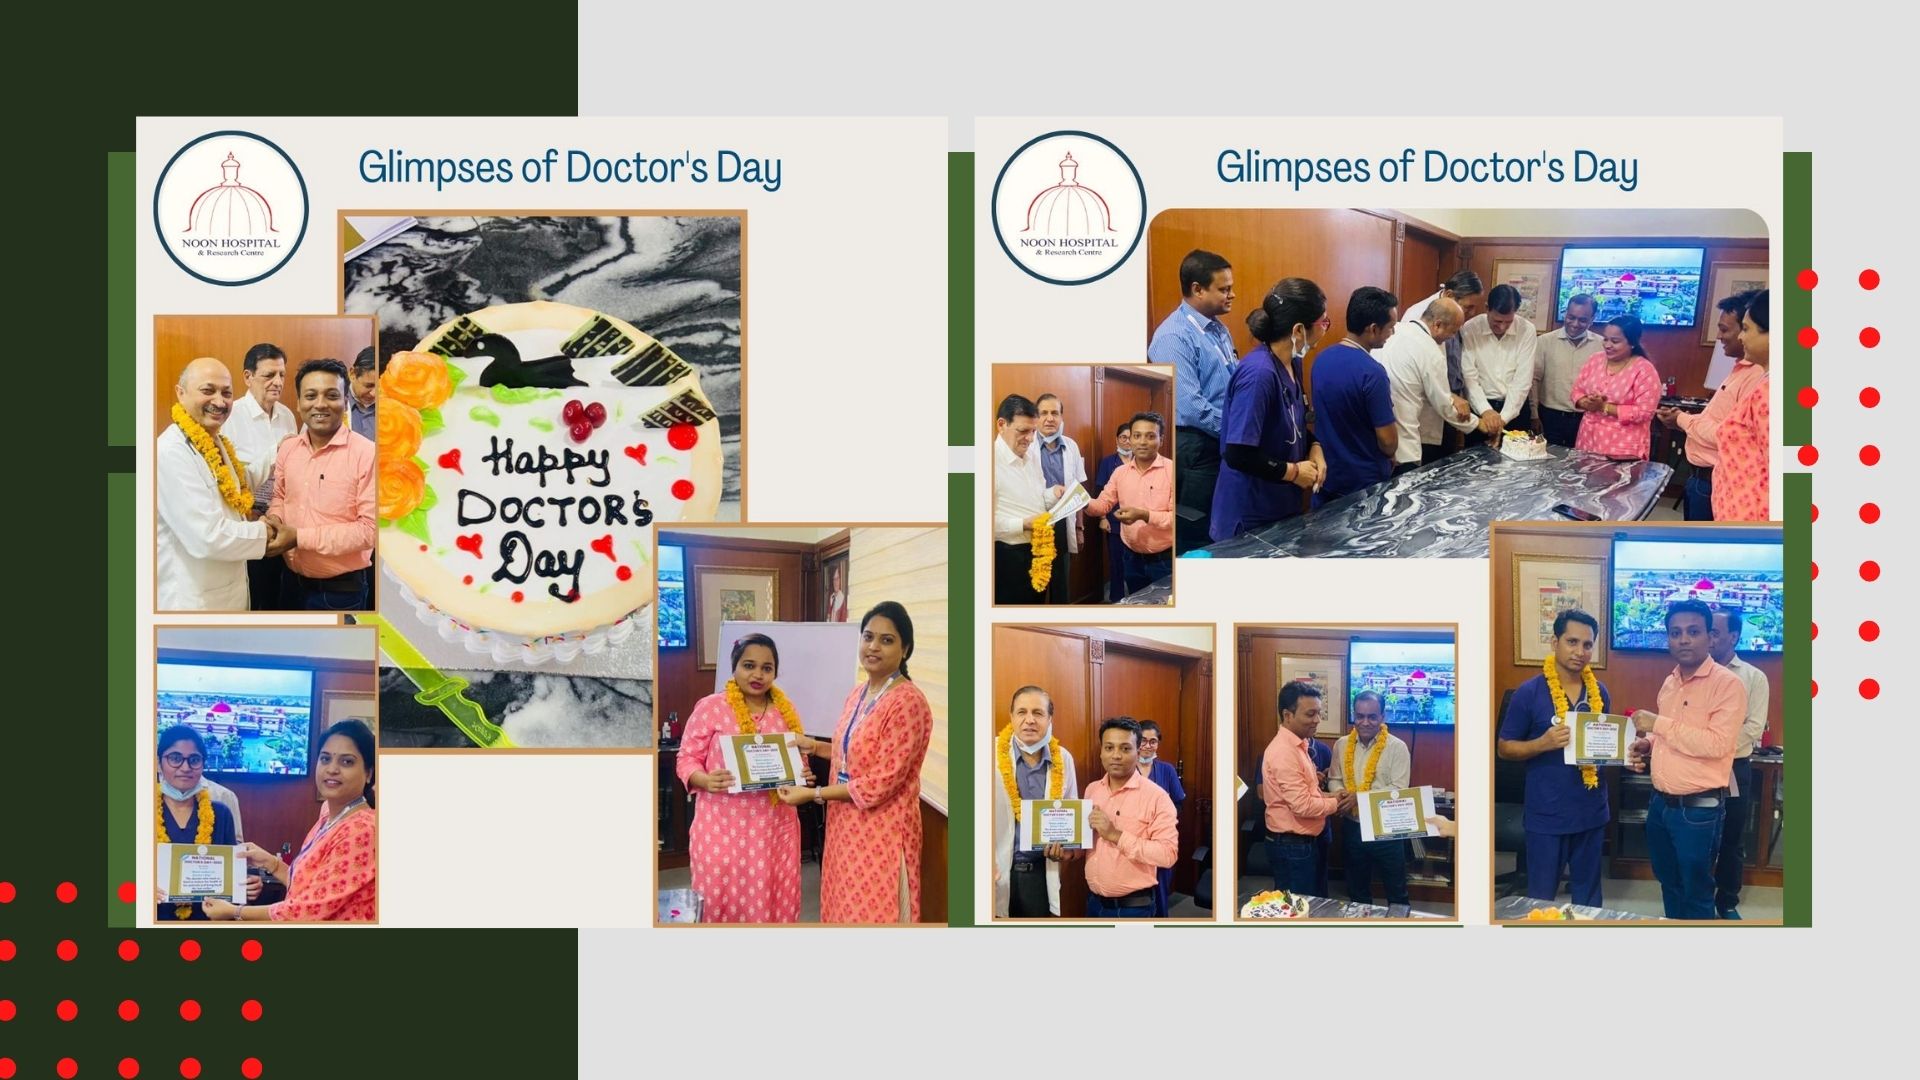 National Doctors’ Day